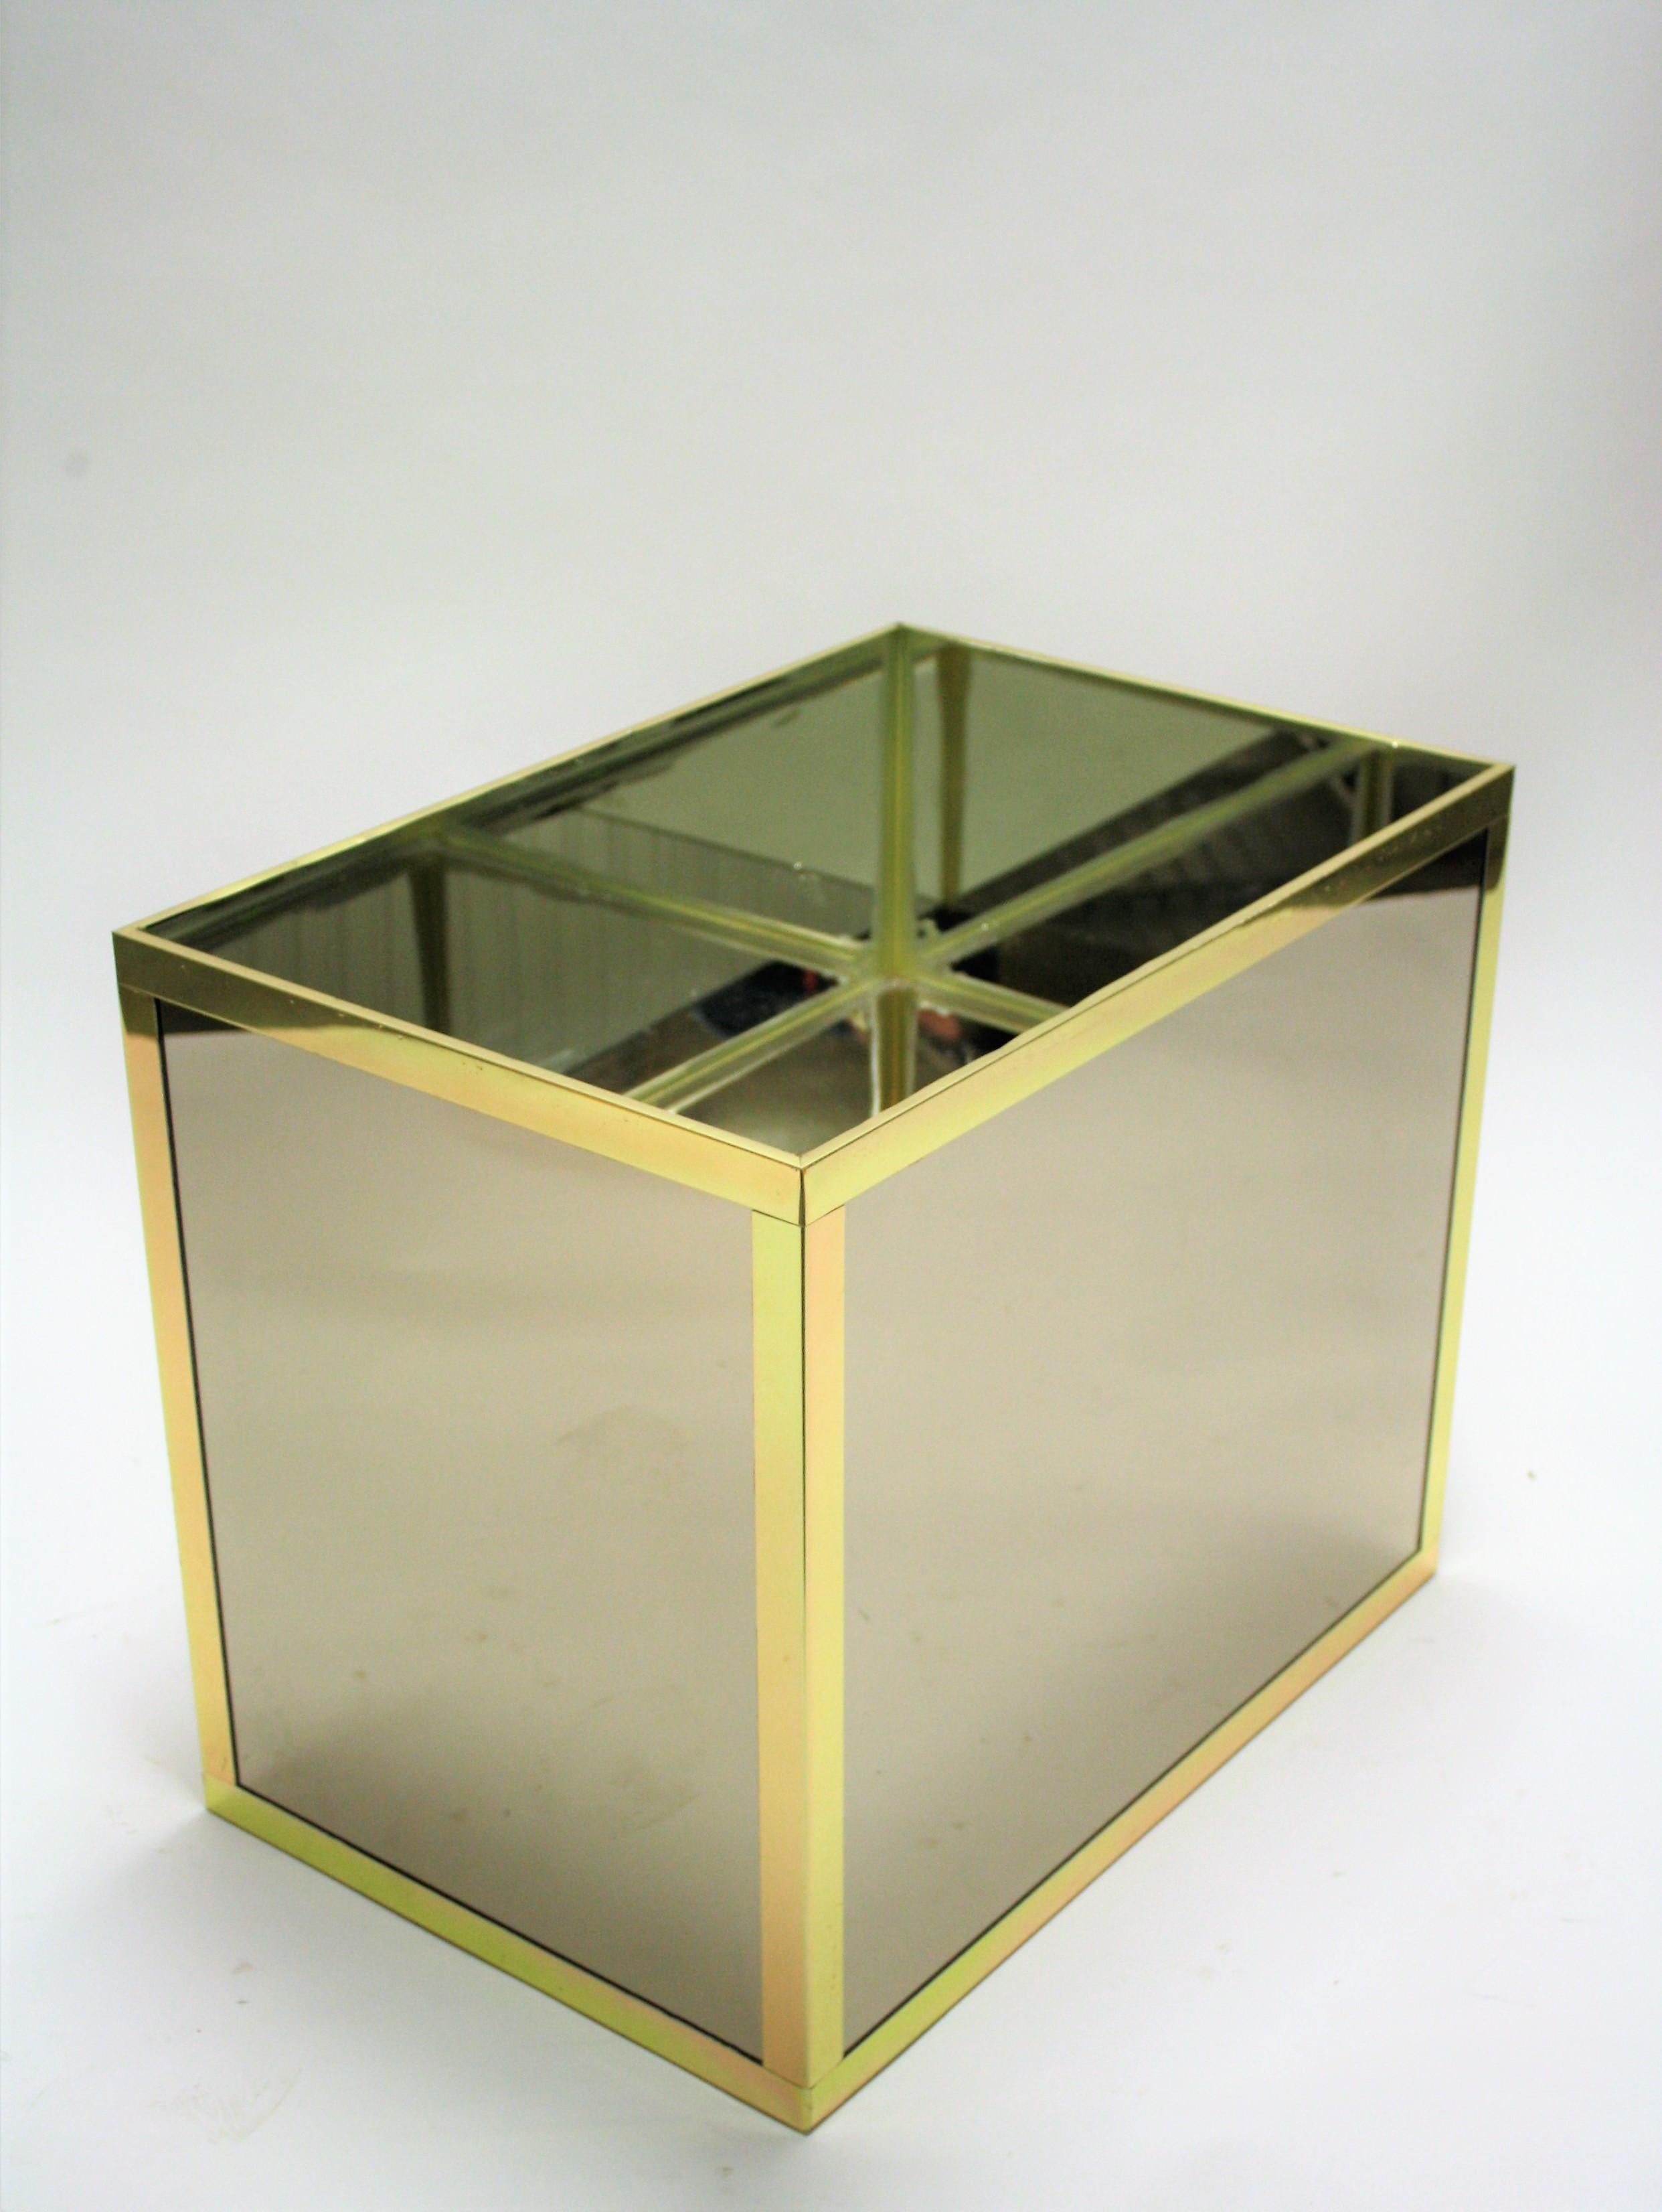 Vintage Mirrored and Brass Planter, 1970s (Messing)